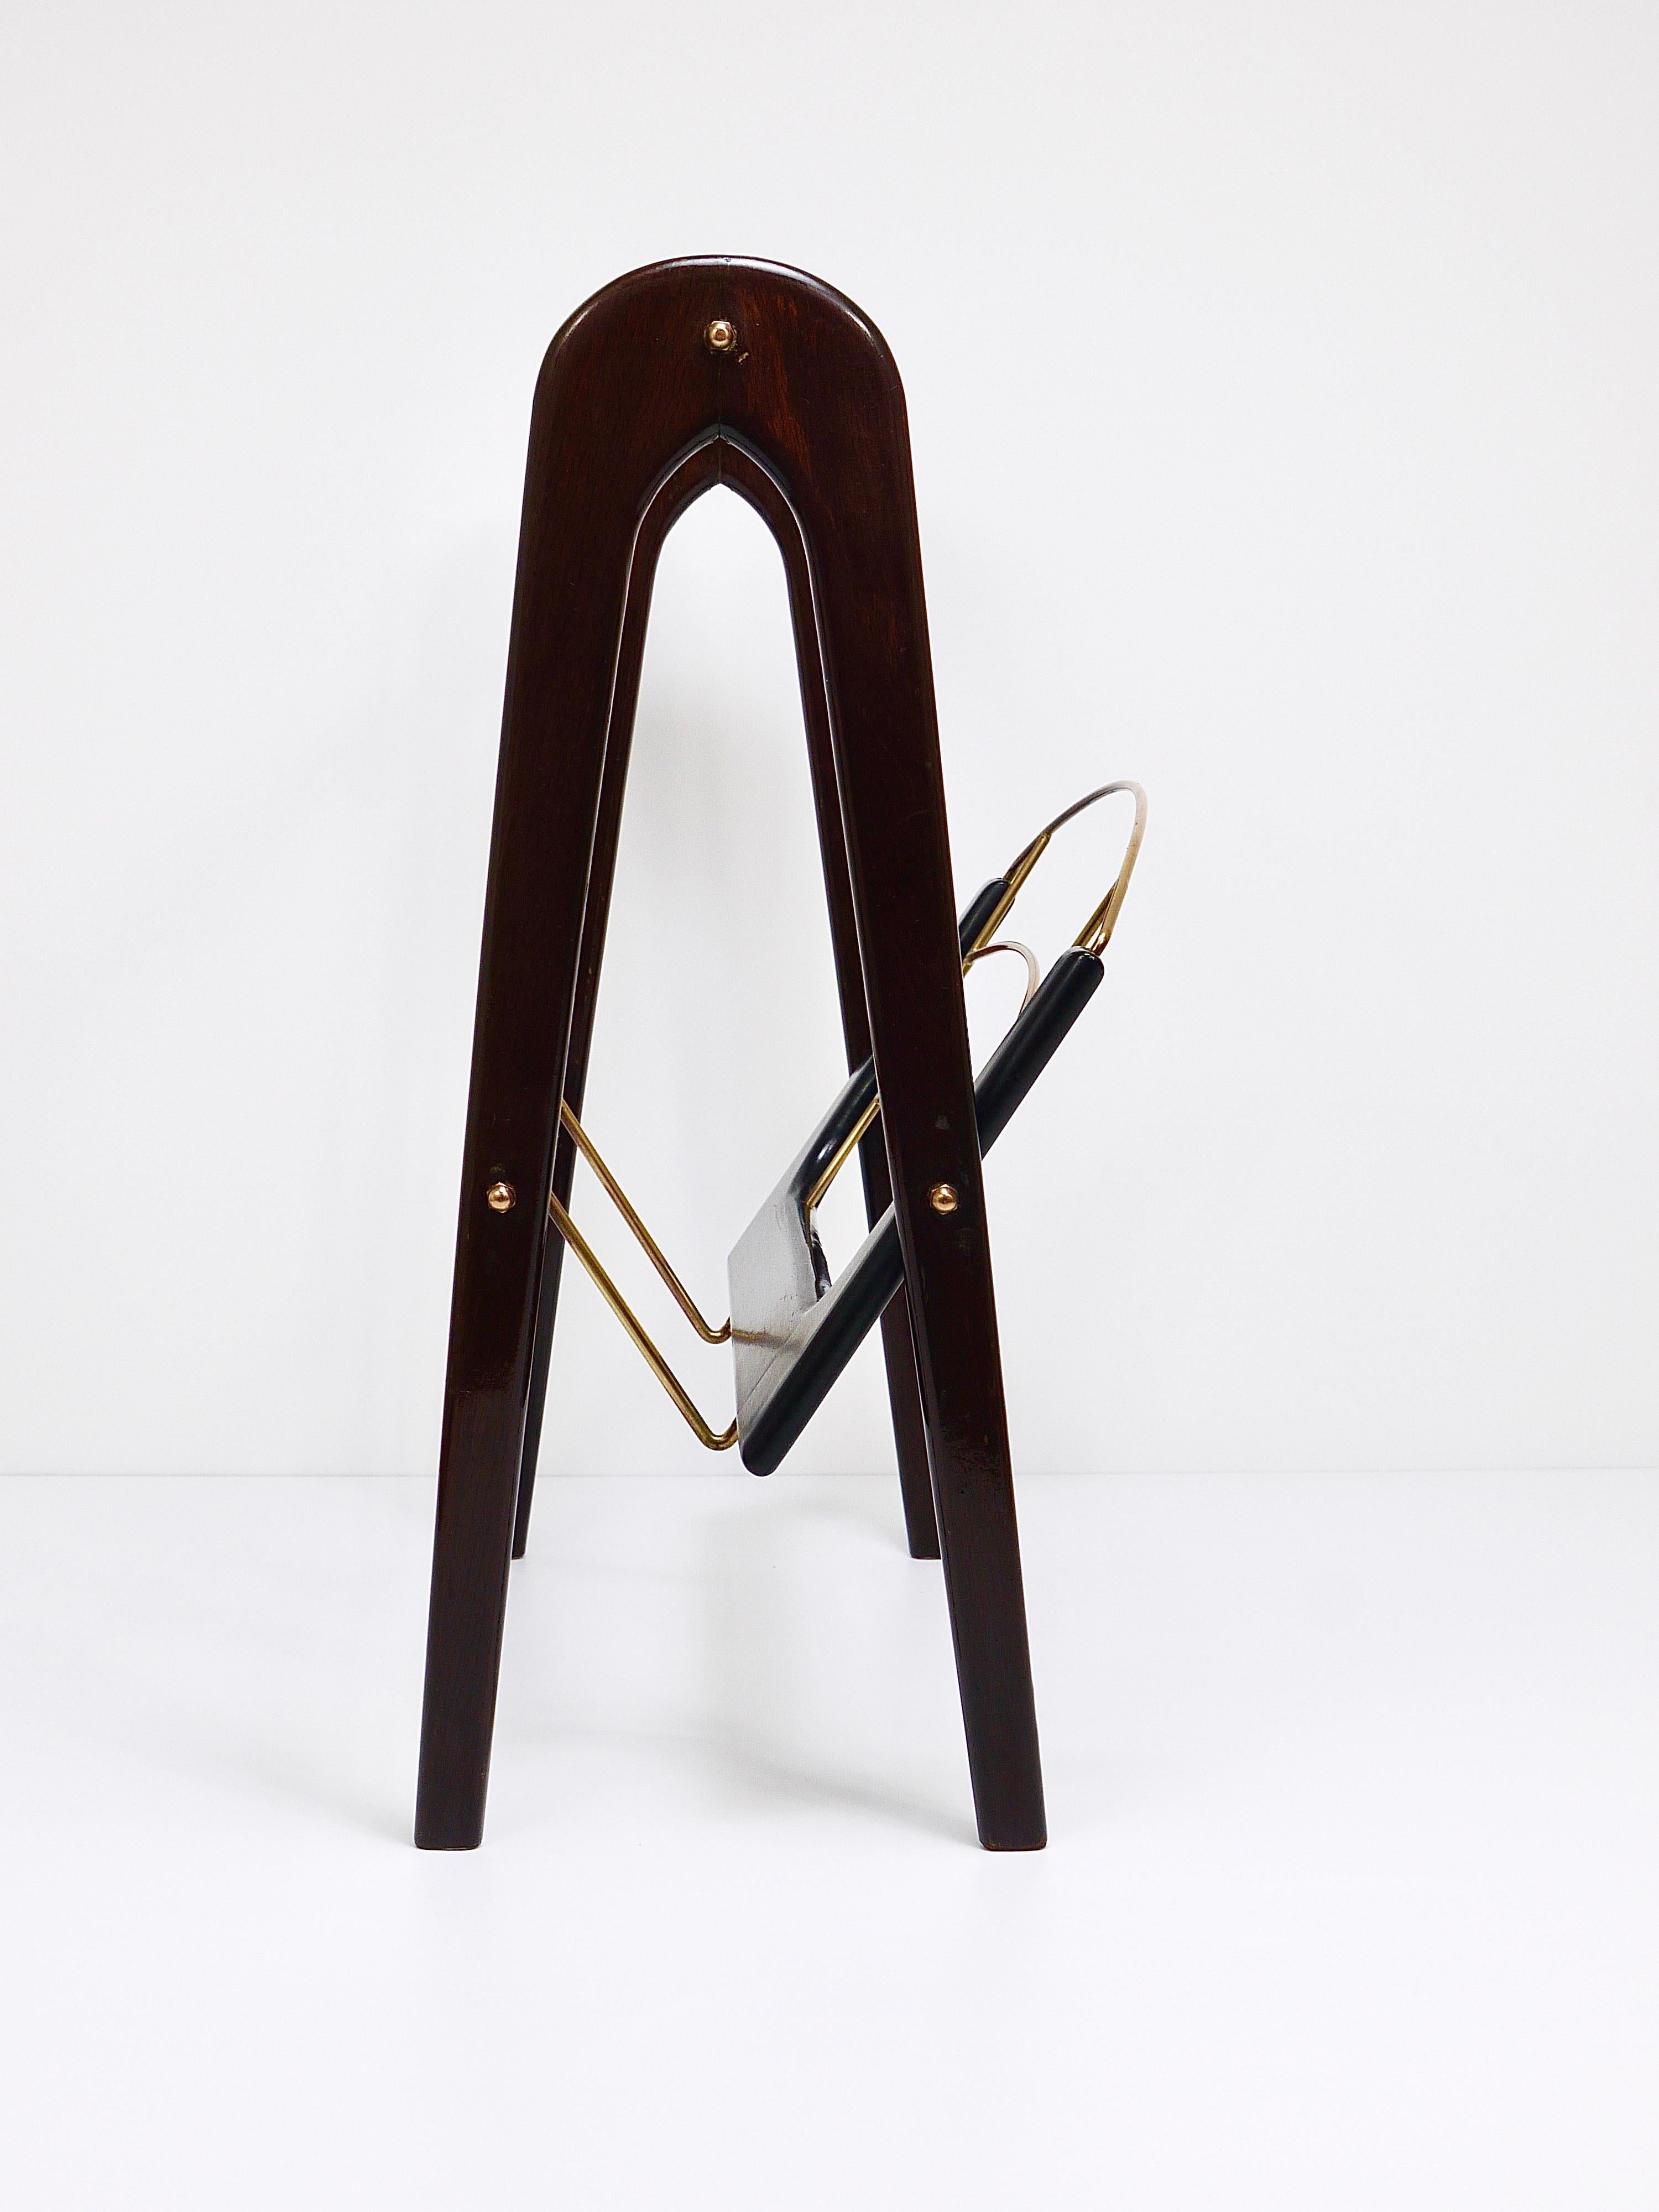 Cesare Lacca Midcentury Magazine Rack, Mahogany & Brass, Italy, 1950s For Sale 1